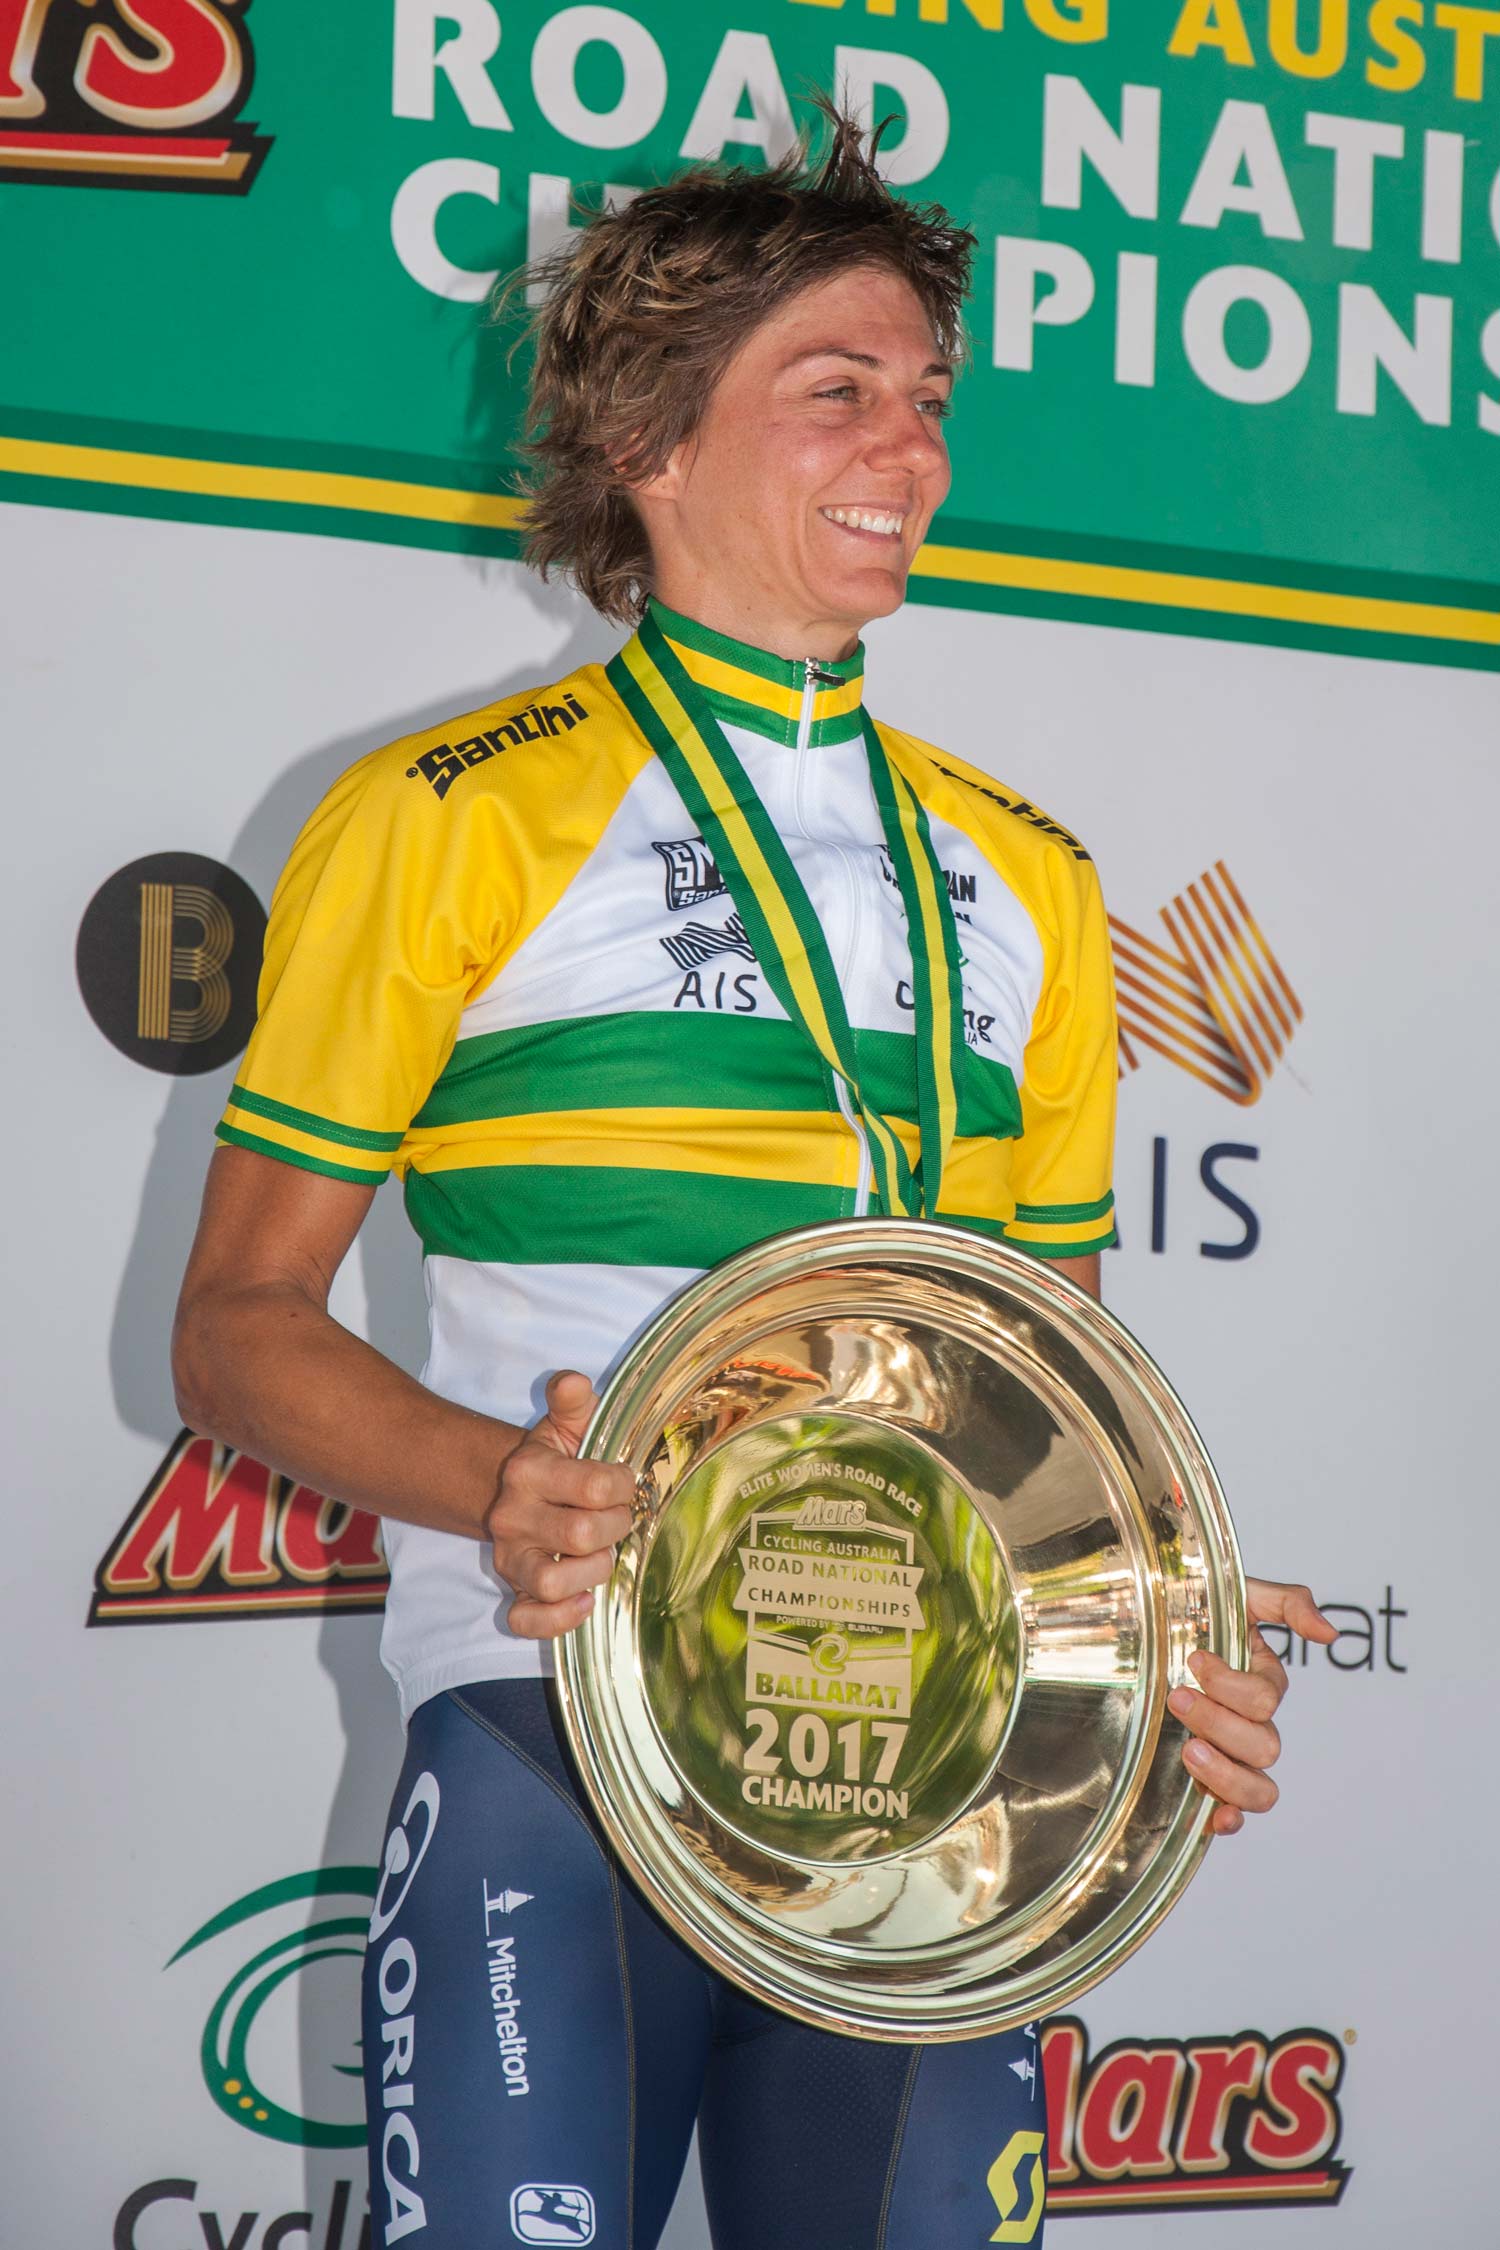 cycling-australia-national-road-championships-road-race-under-23-elite-woman-903